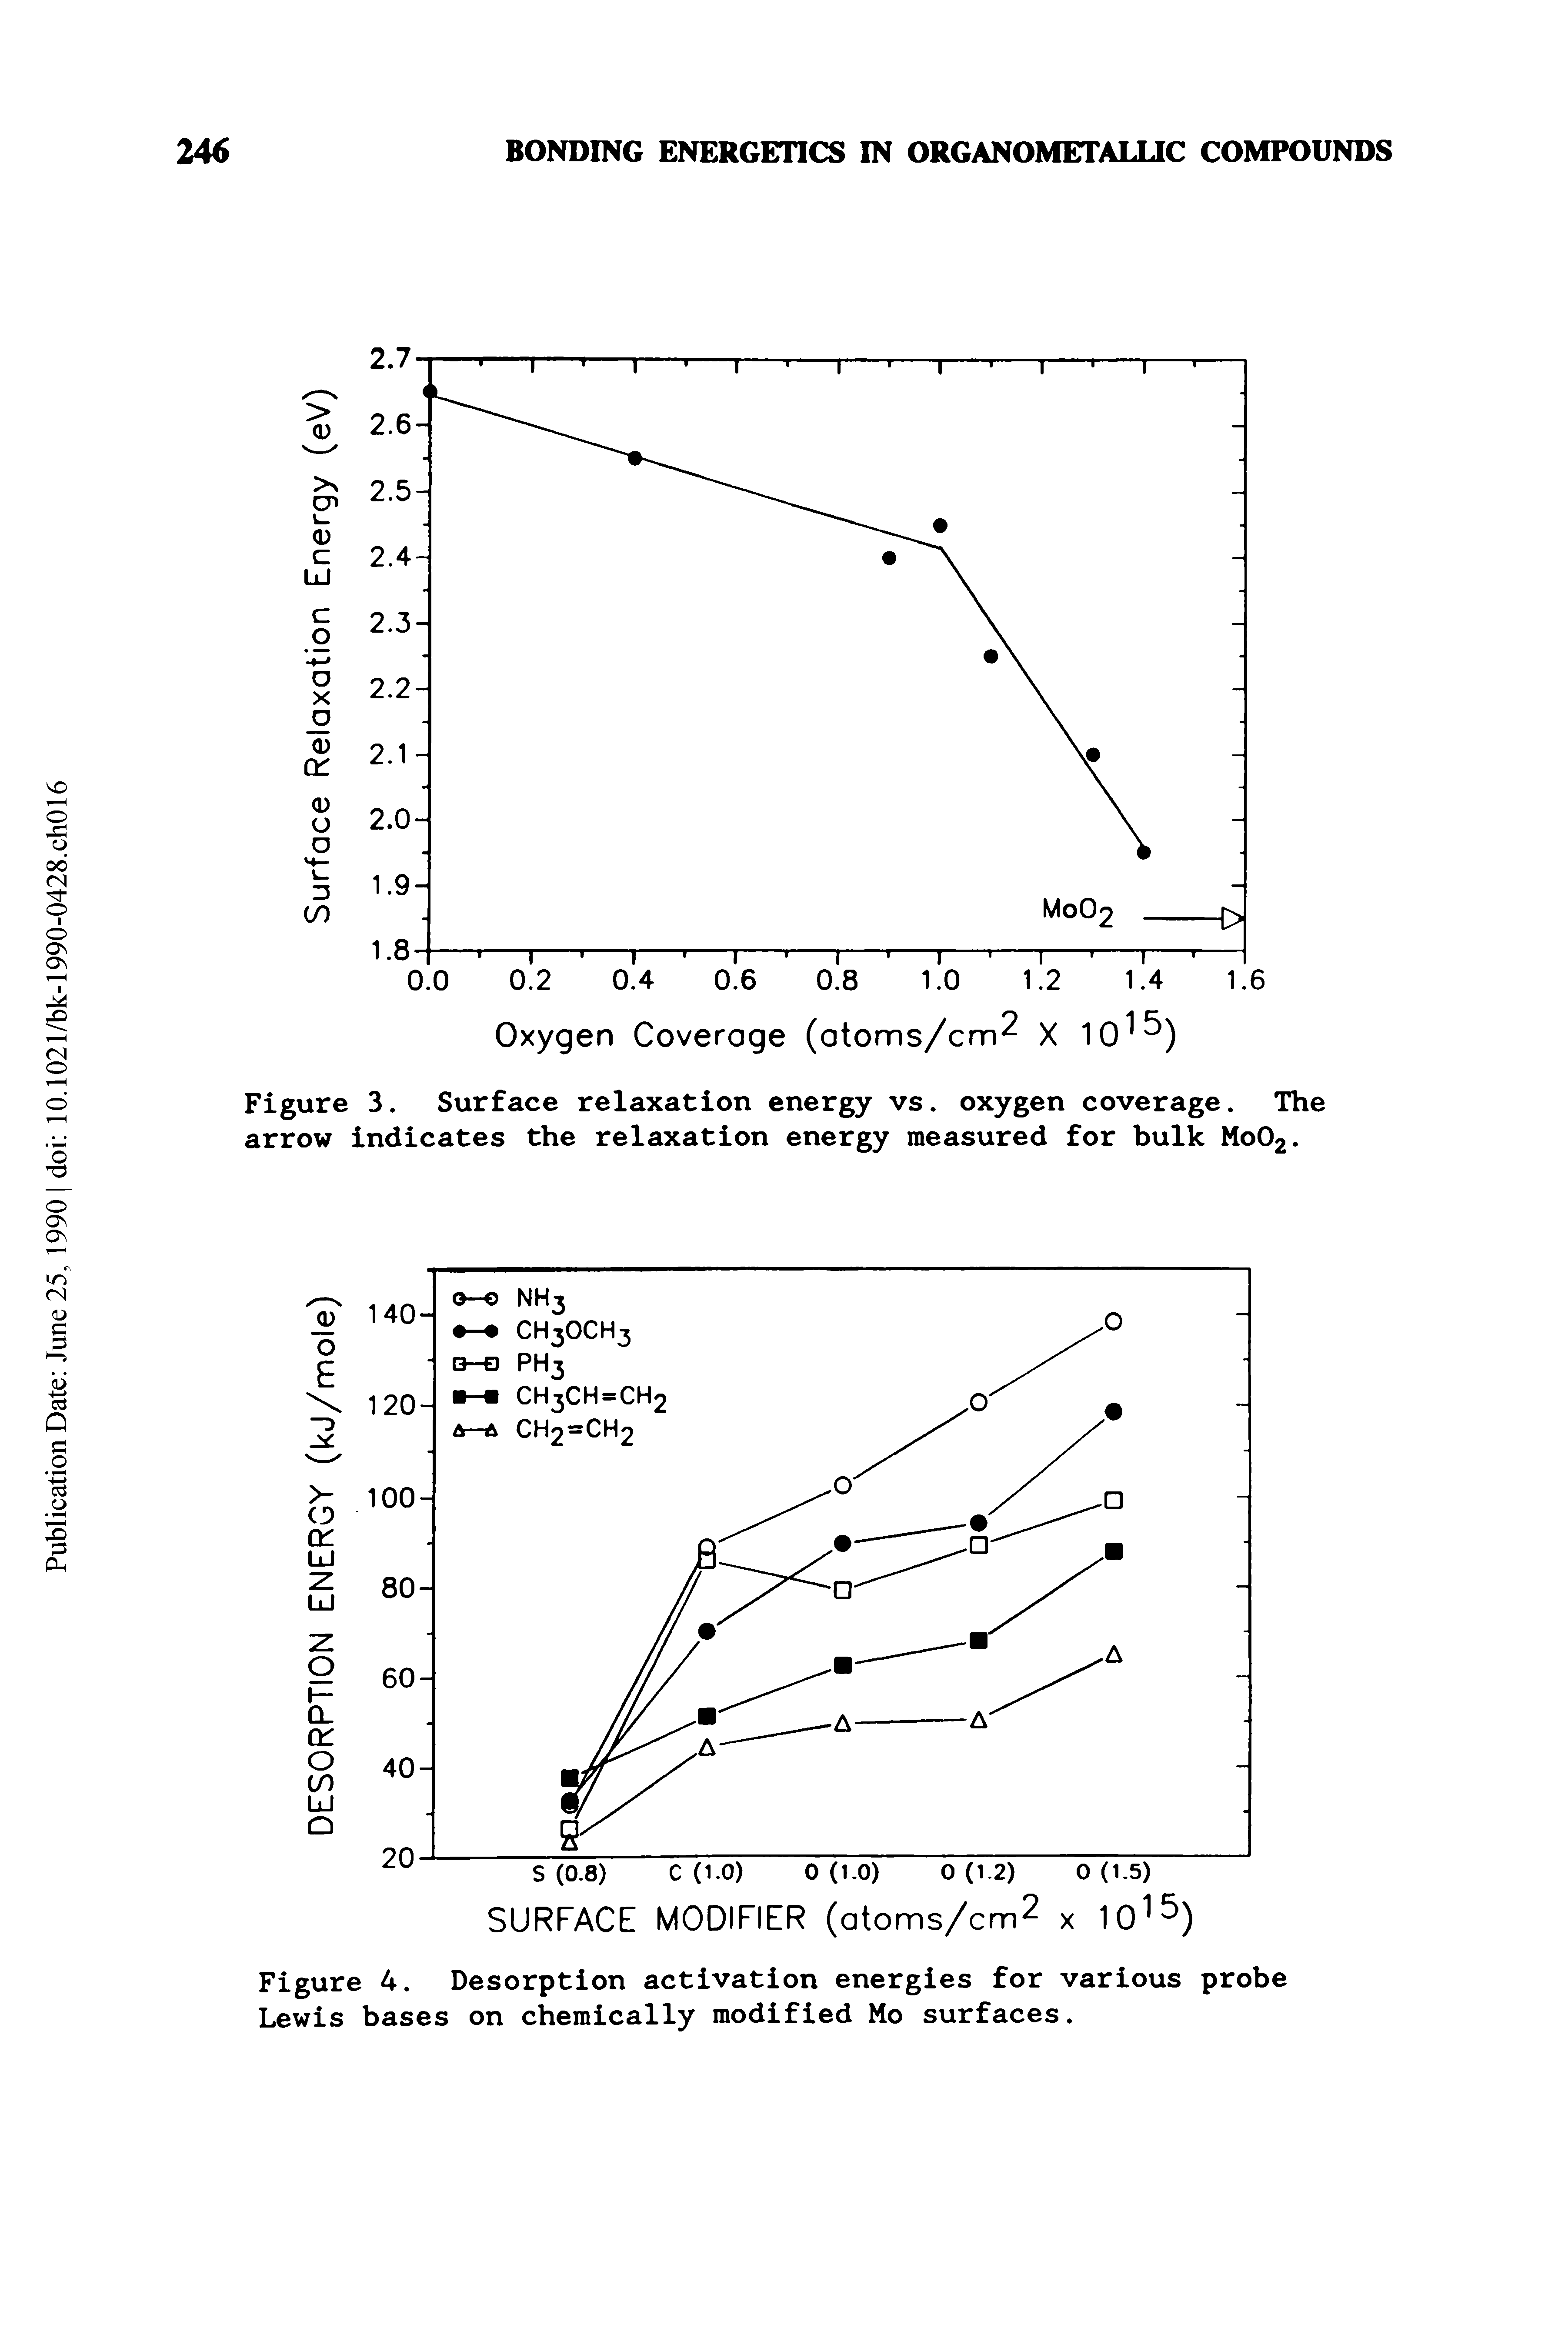 Figure 4. Desorption activation energies for various probe Lewis bases on chemically modified Mo surfaces.